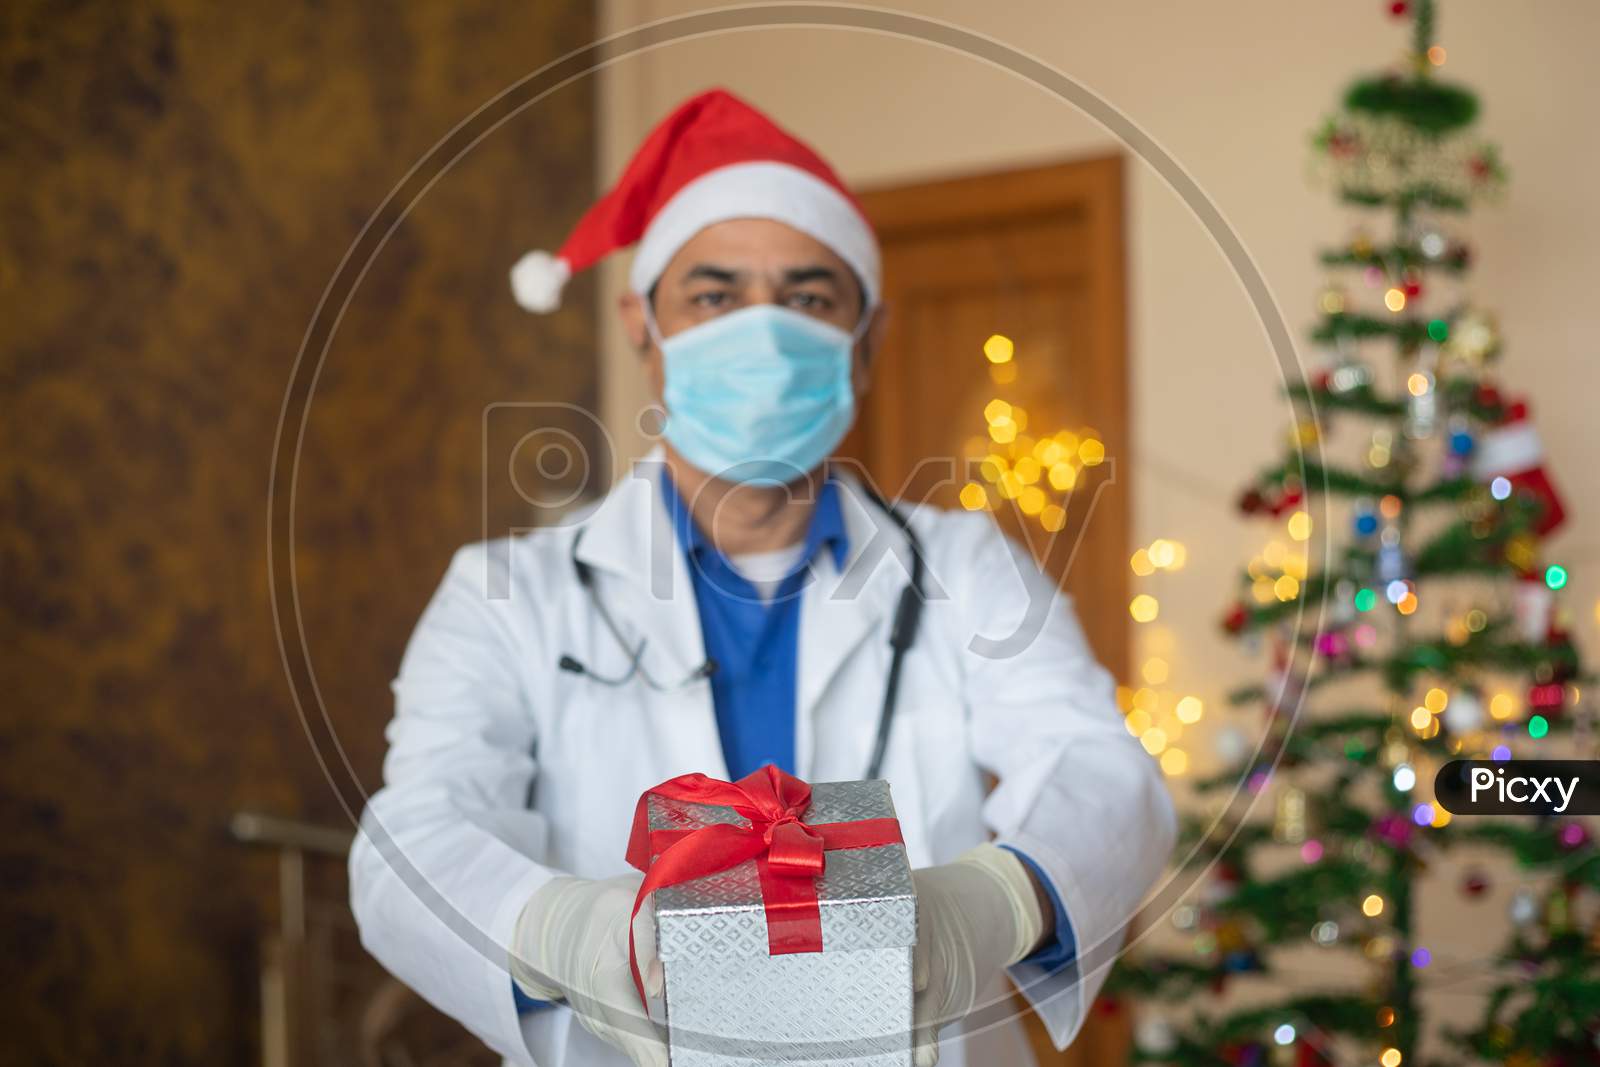 Doctor Wearing Mask And Santa Hat Showing Christmas Gift Box, Celebration During Covid-19 Pandemic, New Normal Lifestyle. Healthcare And Medical, Selective Focus.